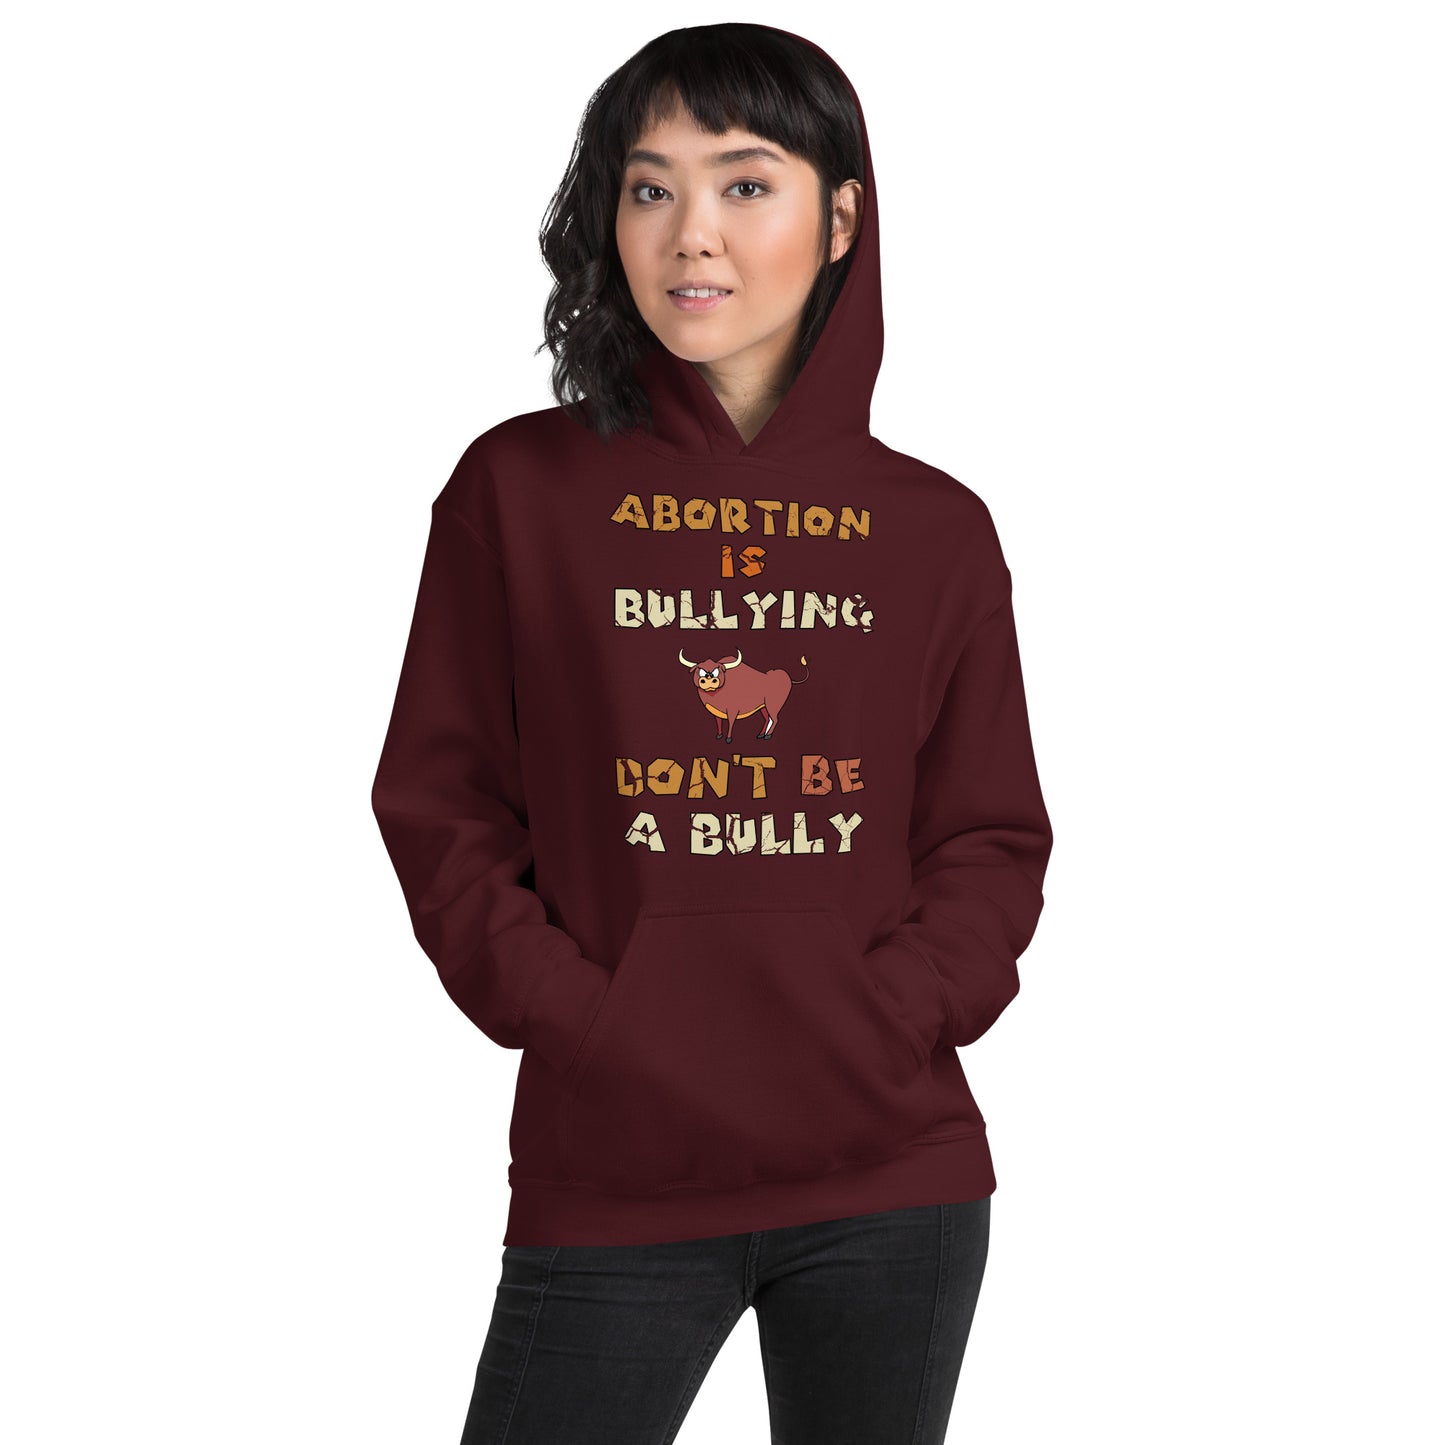 A001 Hoodie – Gildan 18500 Unisex Hoodie Featuring Bull-Steer Graphic with text “Abortion is Bullying. Don’t be a Bully.”